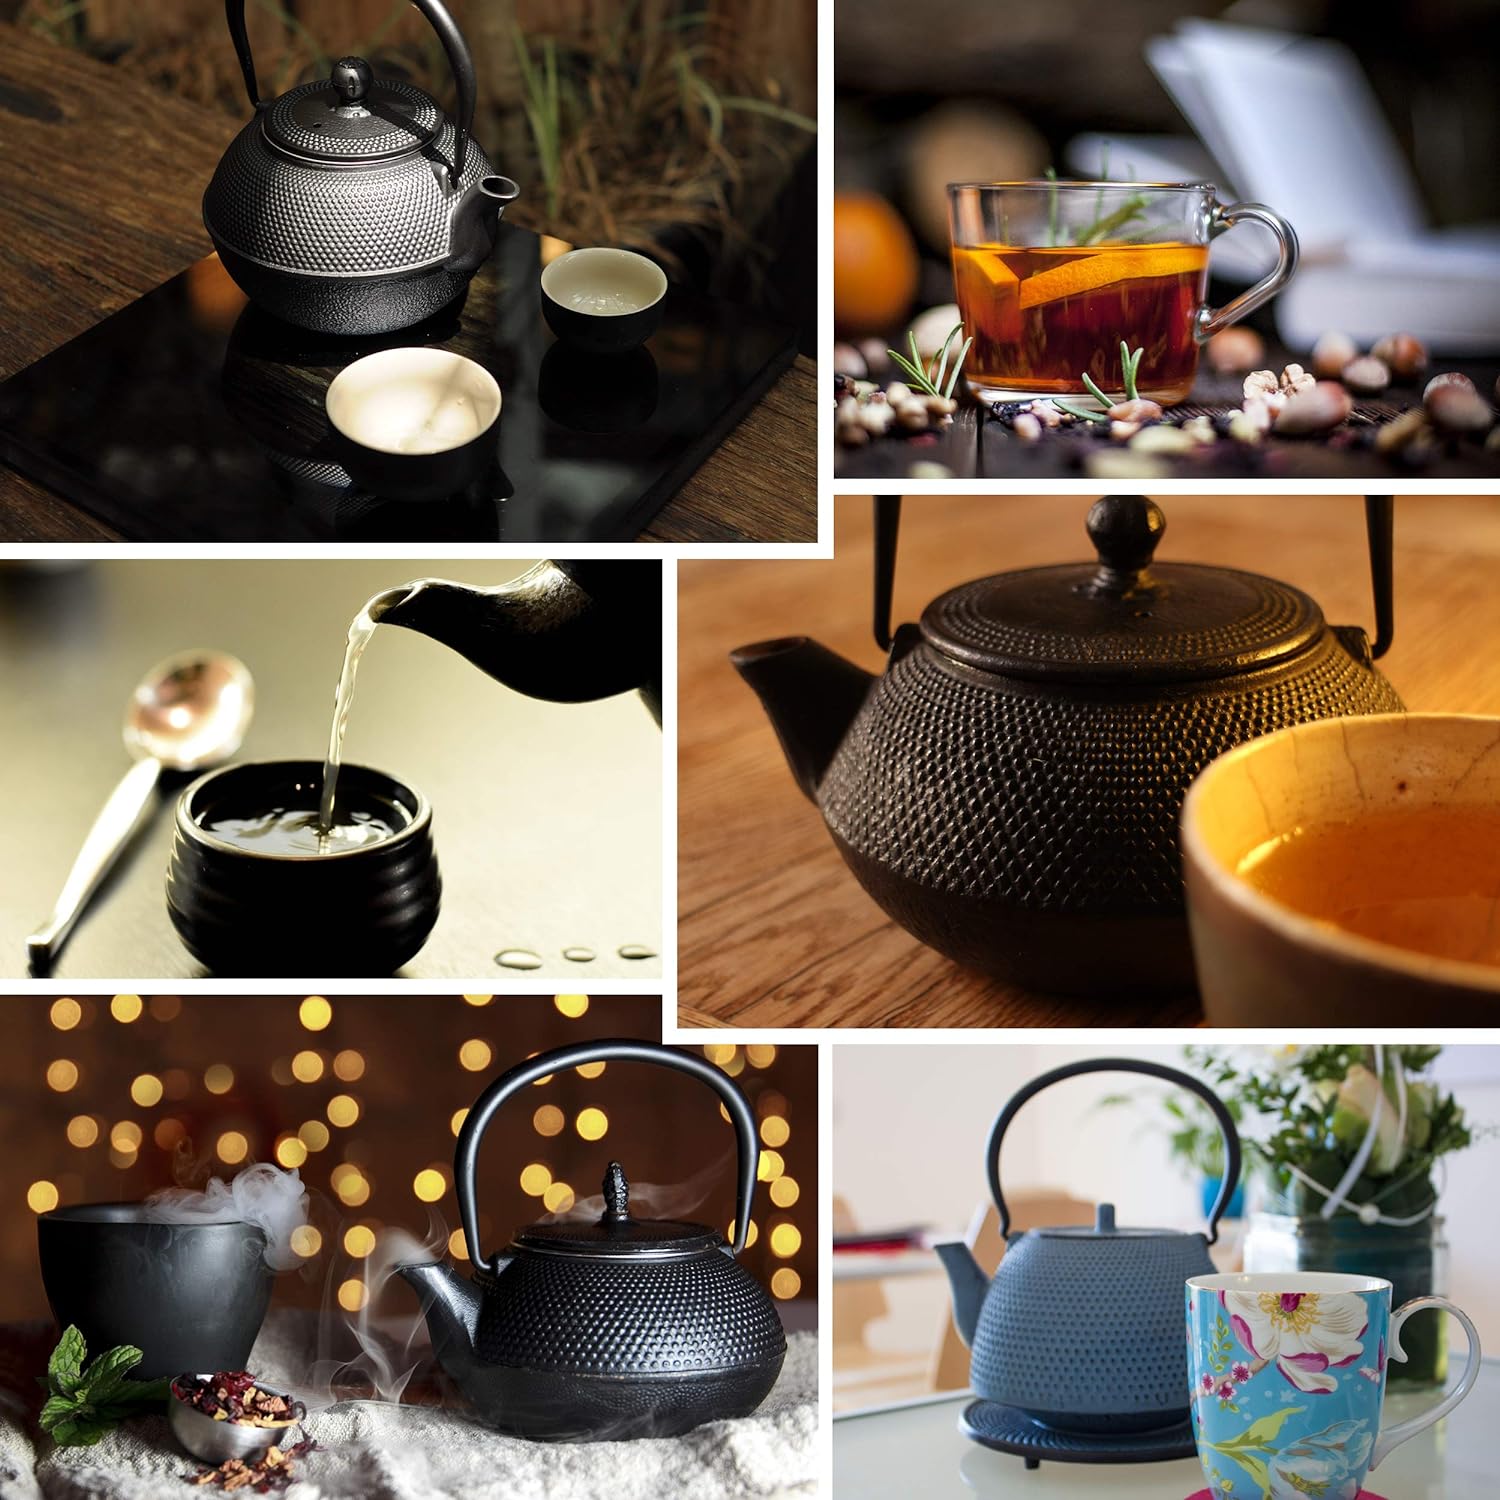 teeblume Cast Iron Teapot Arare Cast Iron Teapot with Strainer Including Free Coaster in Black Teapot Enamelled Inside and Outside Gloss Black 900 ml